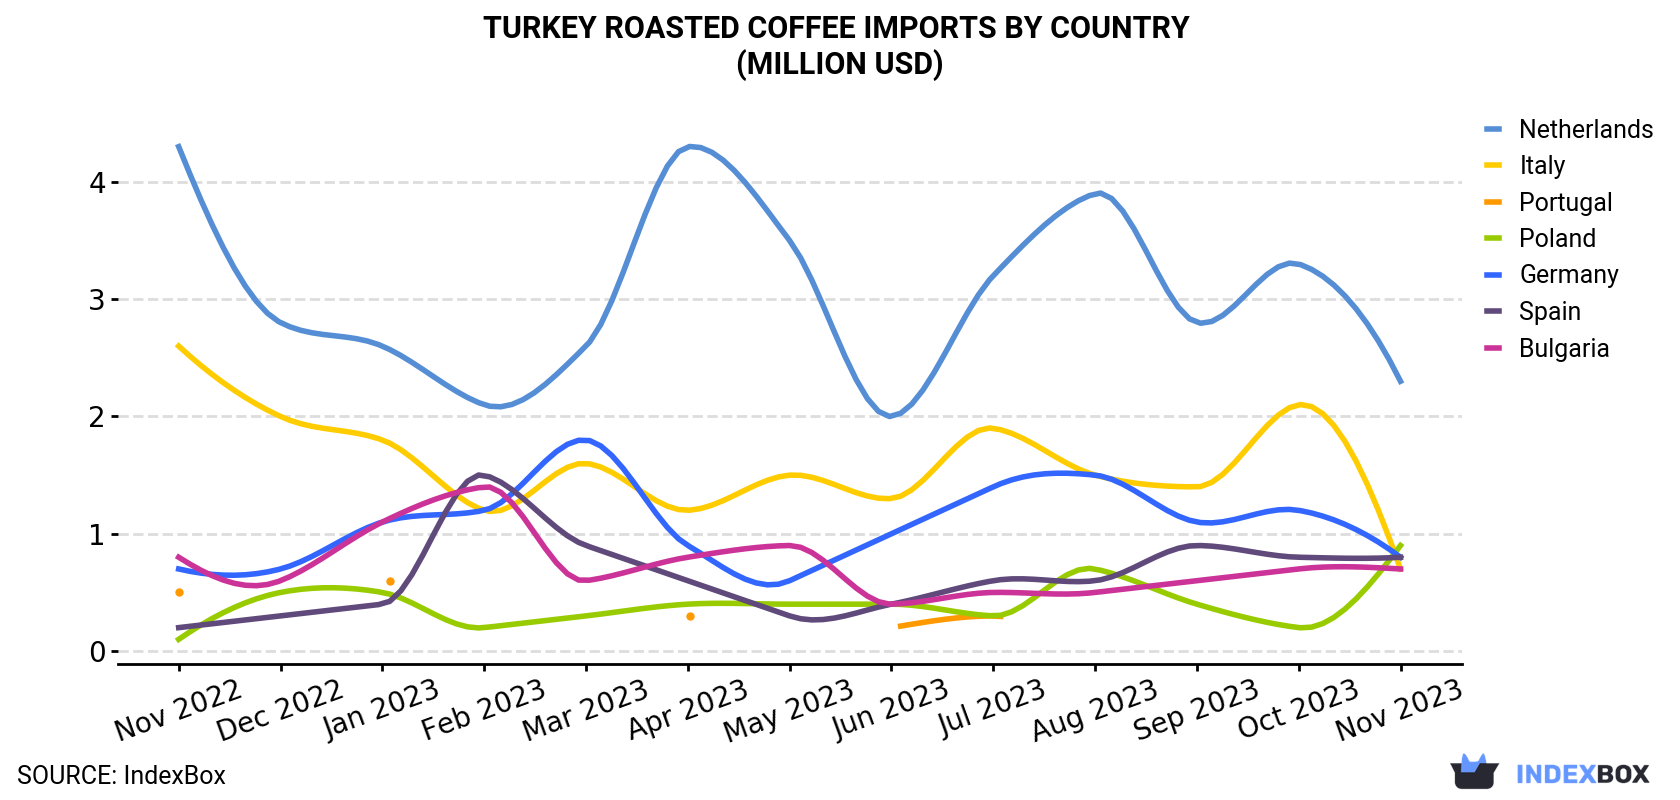 Turkey Roasted Coffee Imports By Country (Million USD)